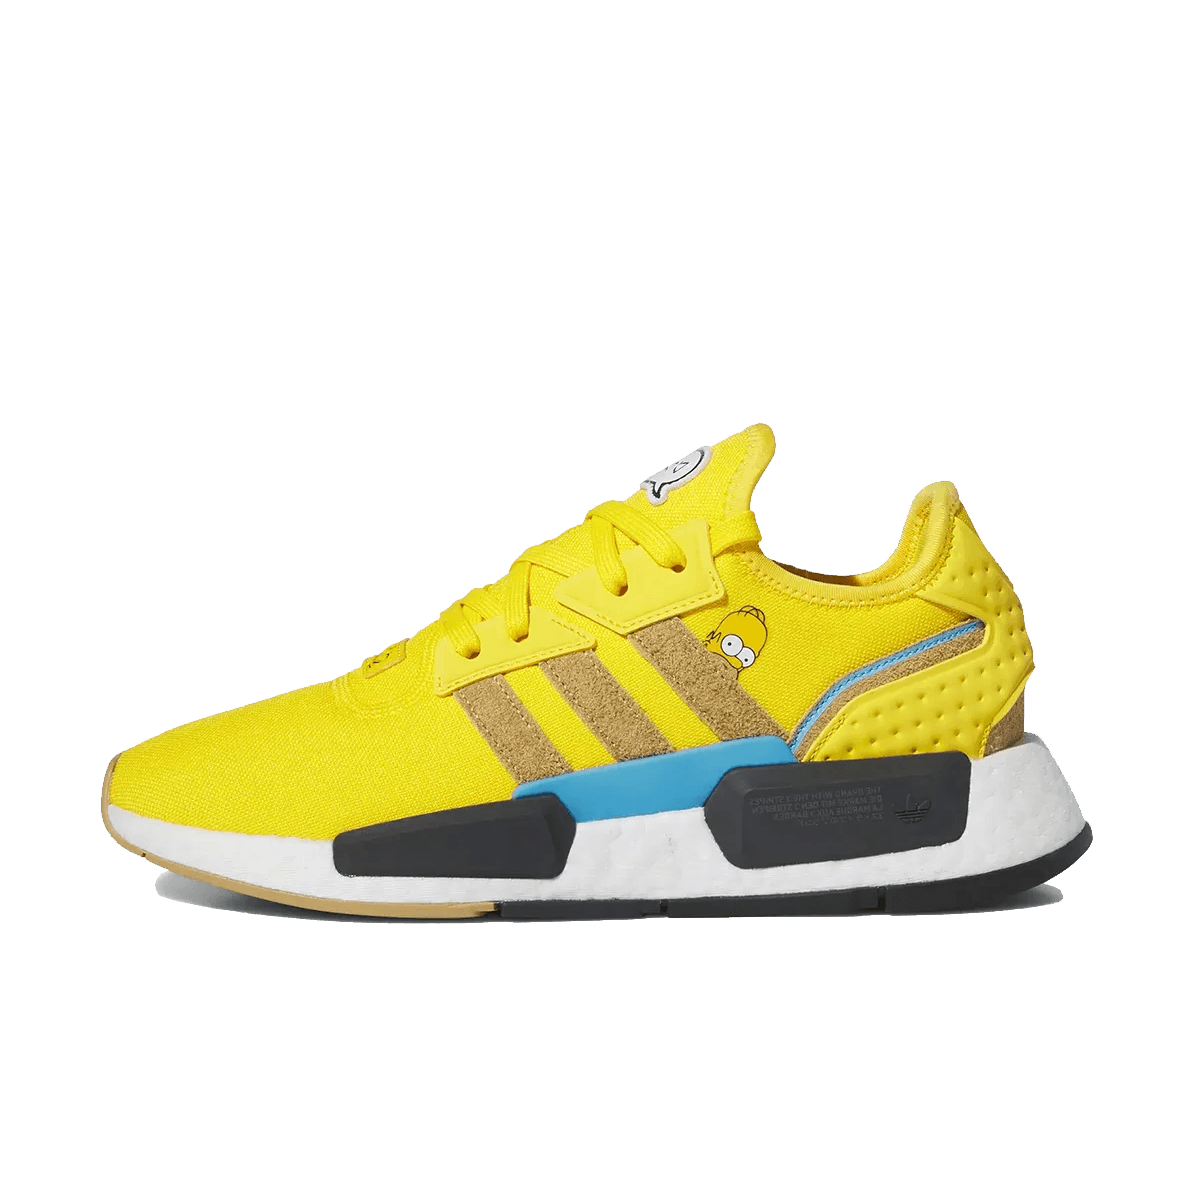 The Simpsons x adidas NMD G1 Low 'Homer'